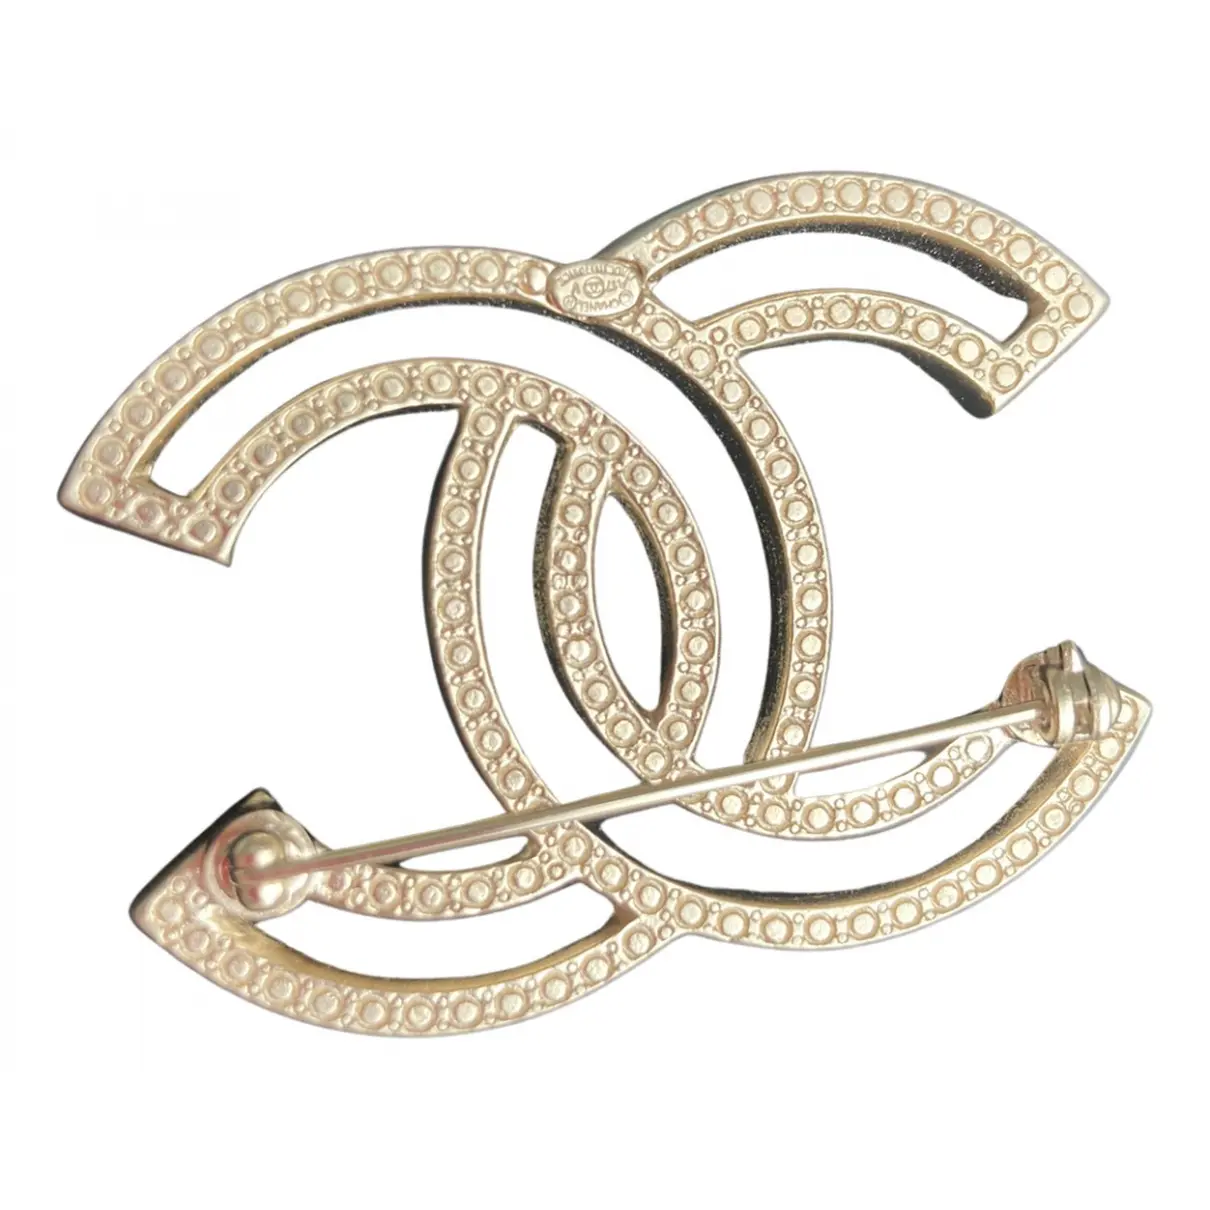 Buy Chanel CC crystal pin & brooche online